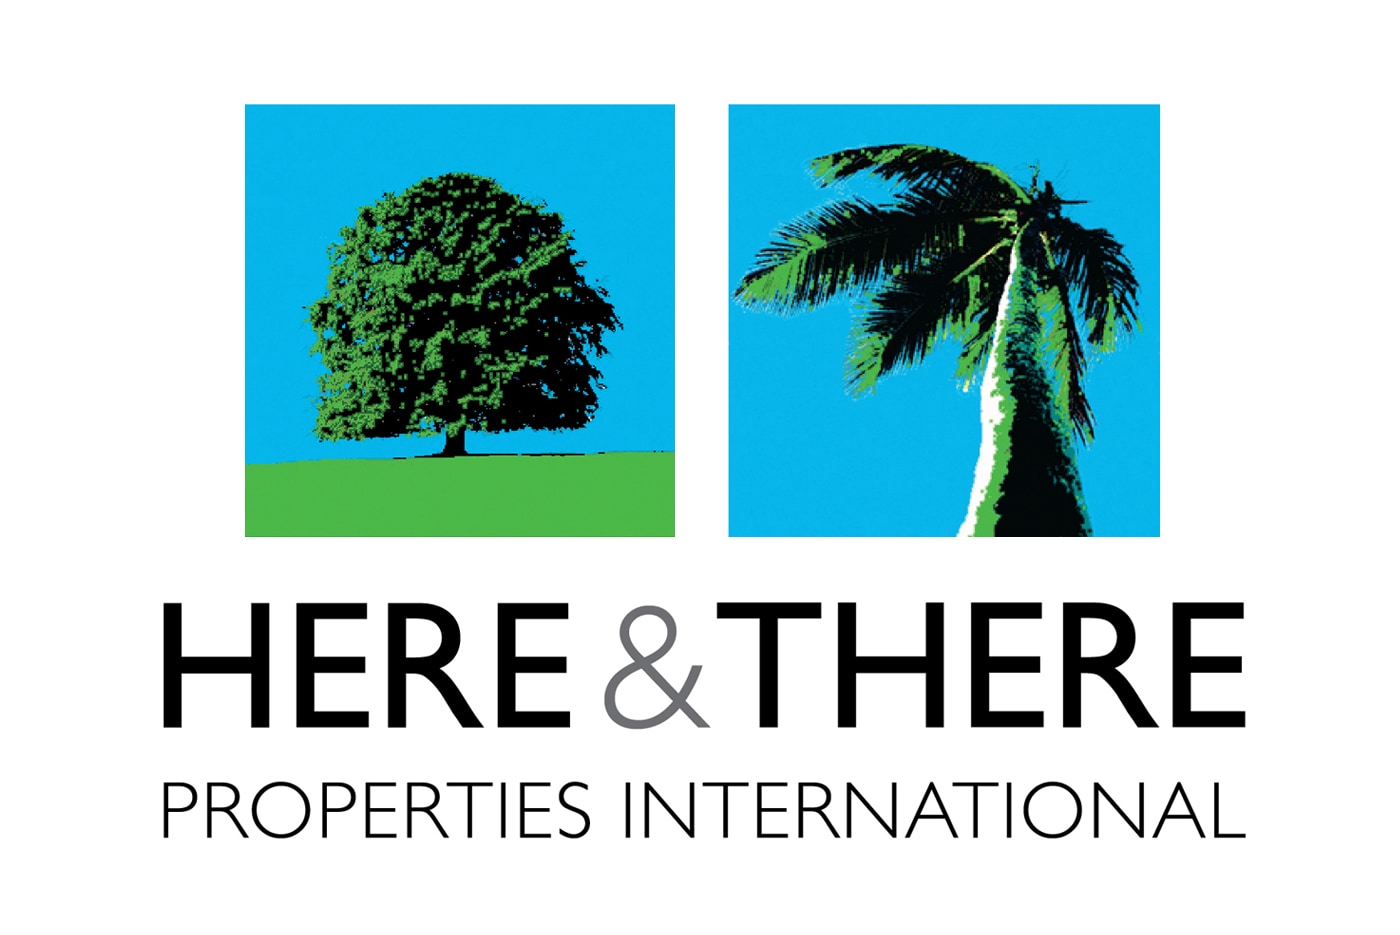 Here & There Properties International